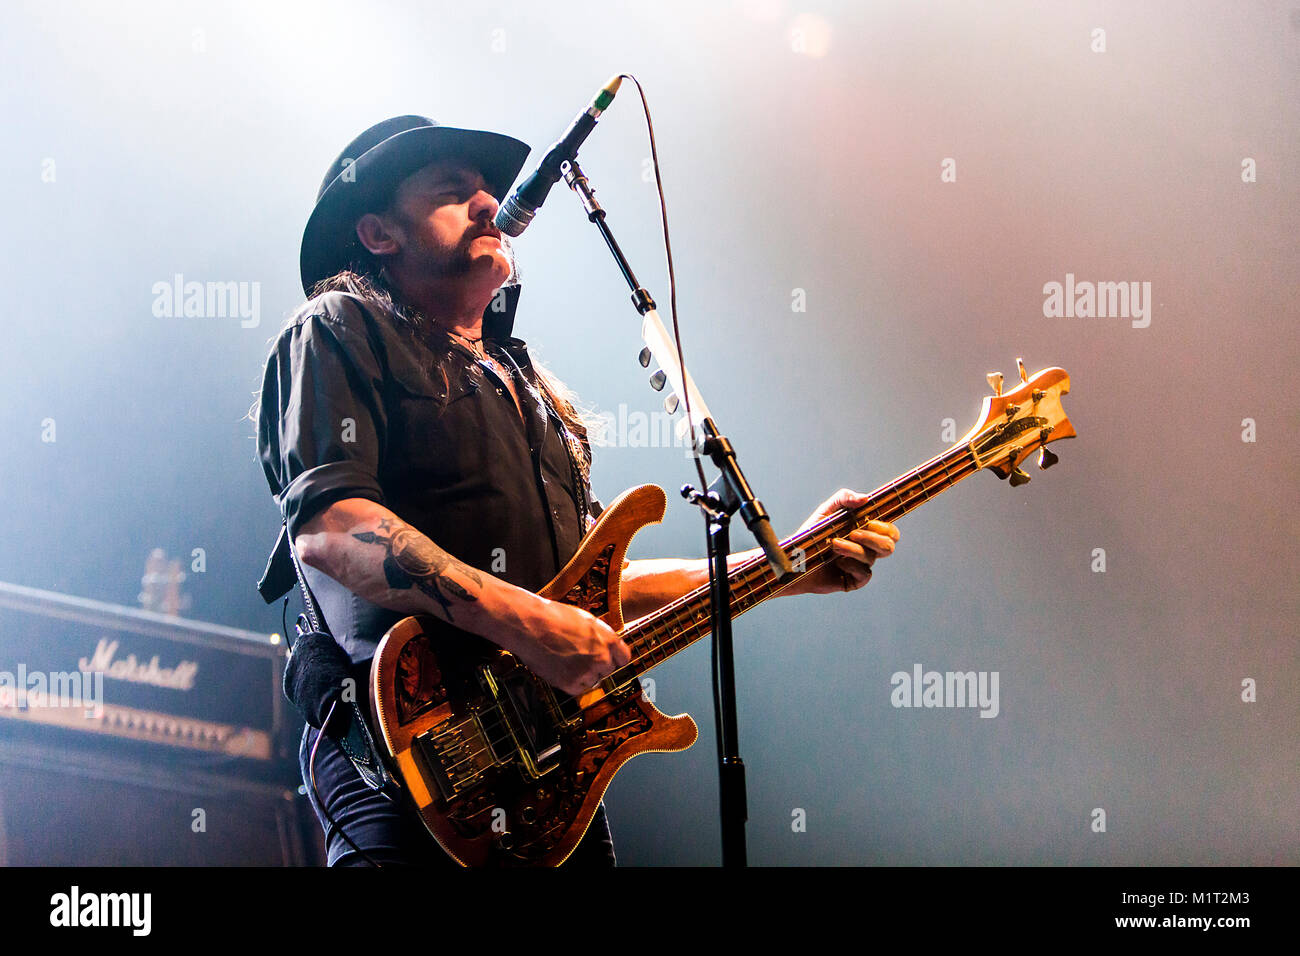 The English hard rock band Motörhead performs a live concert at the Grieghallen in Bergen. Here bassist, womanizer and vocalist Lemmy is seen live on stage. Norway 10/06 2012. Stock Photo